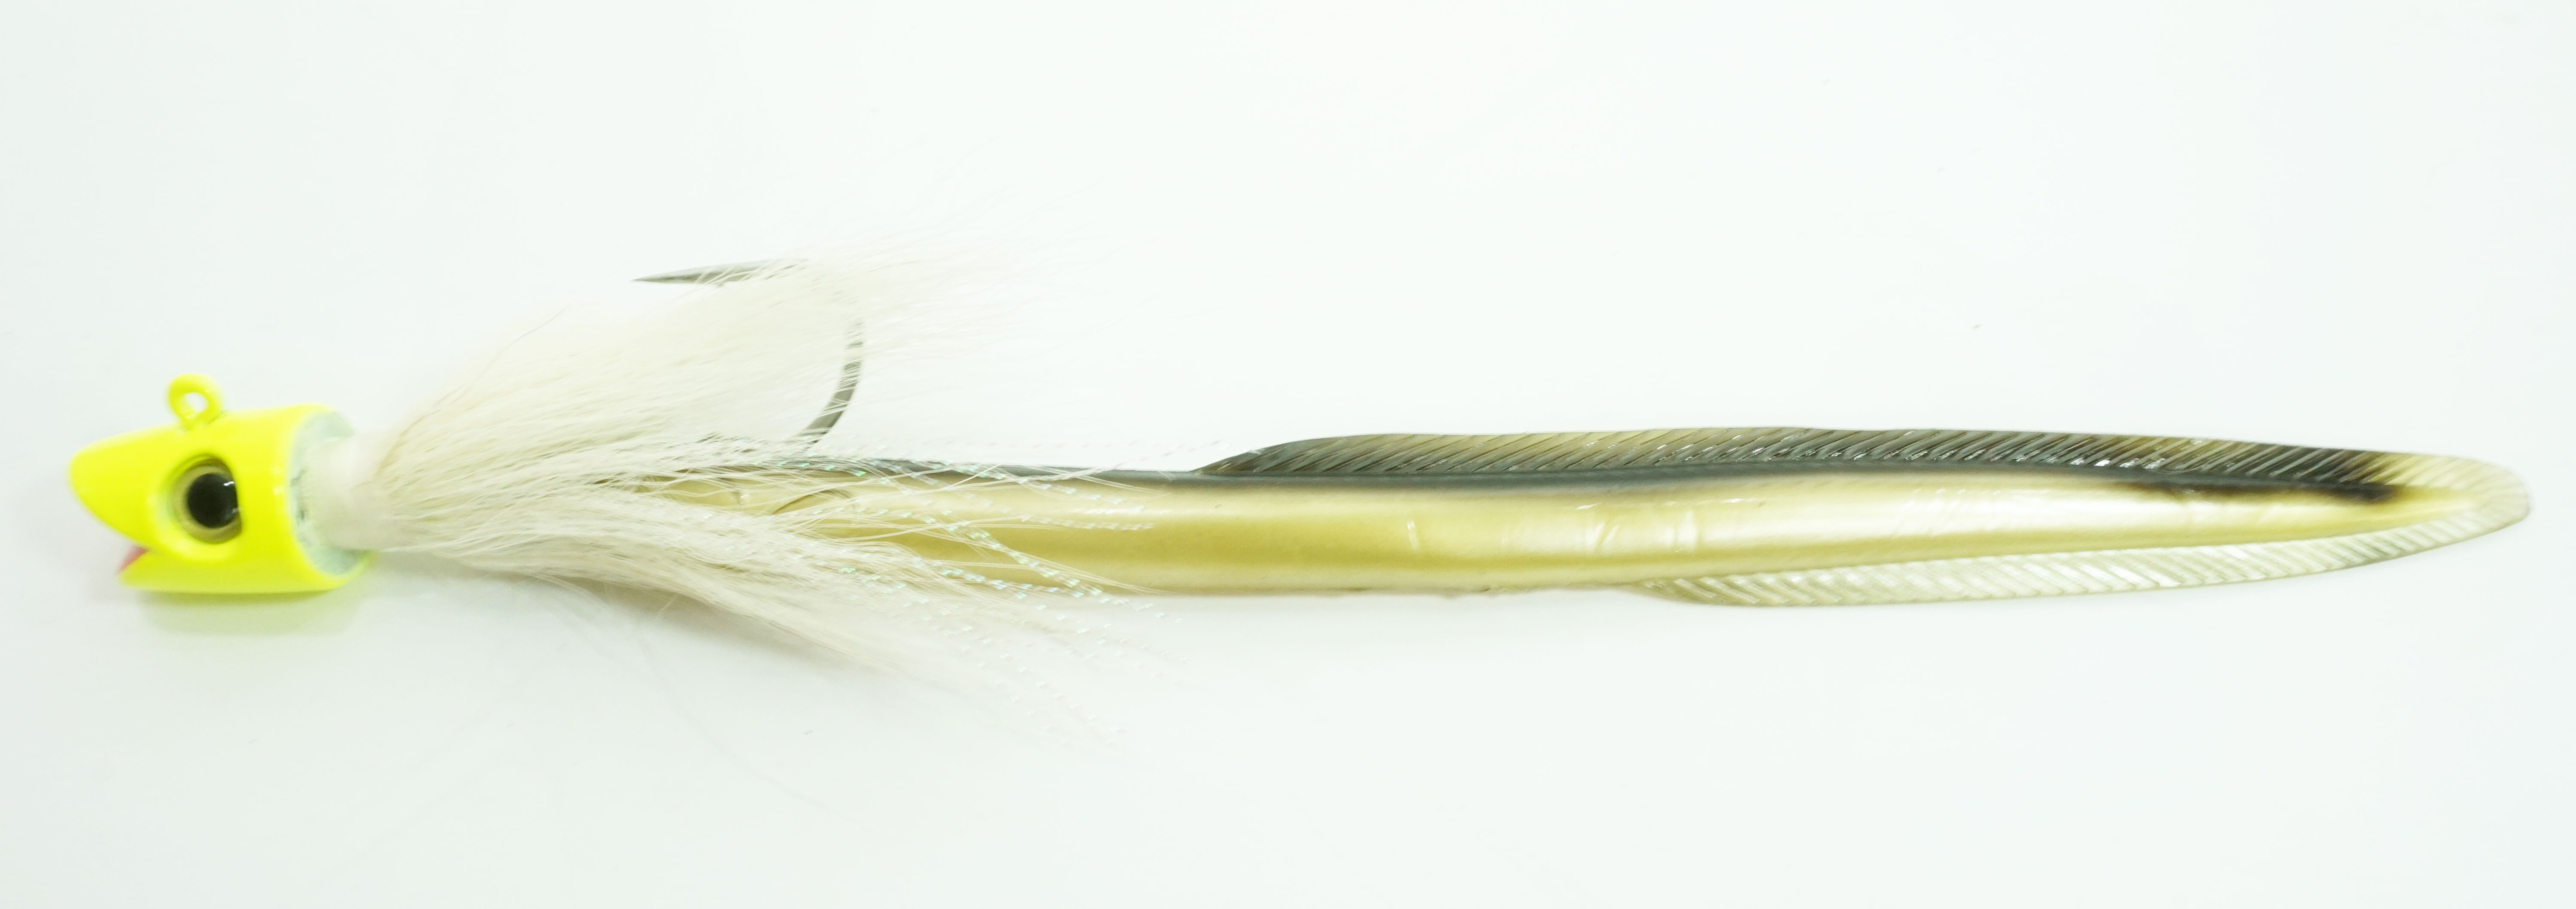 Smiling Bucktail Jig and Eel Chartreuse Head 4oz